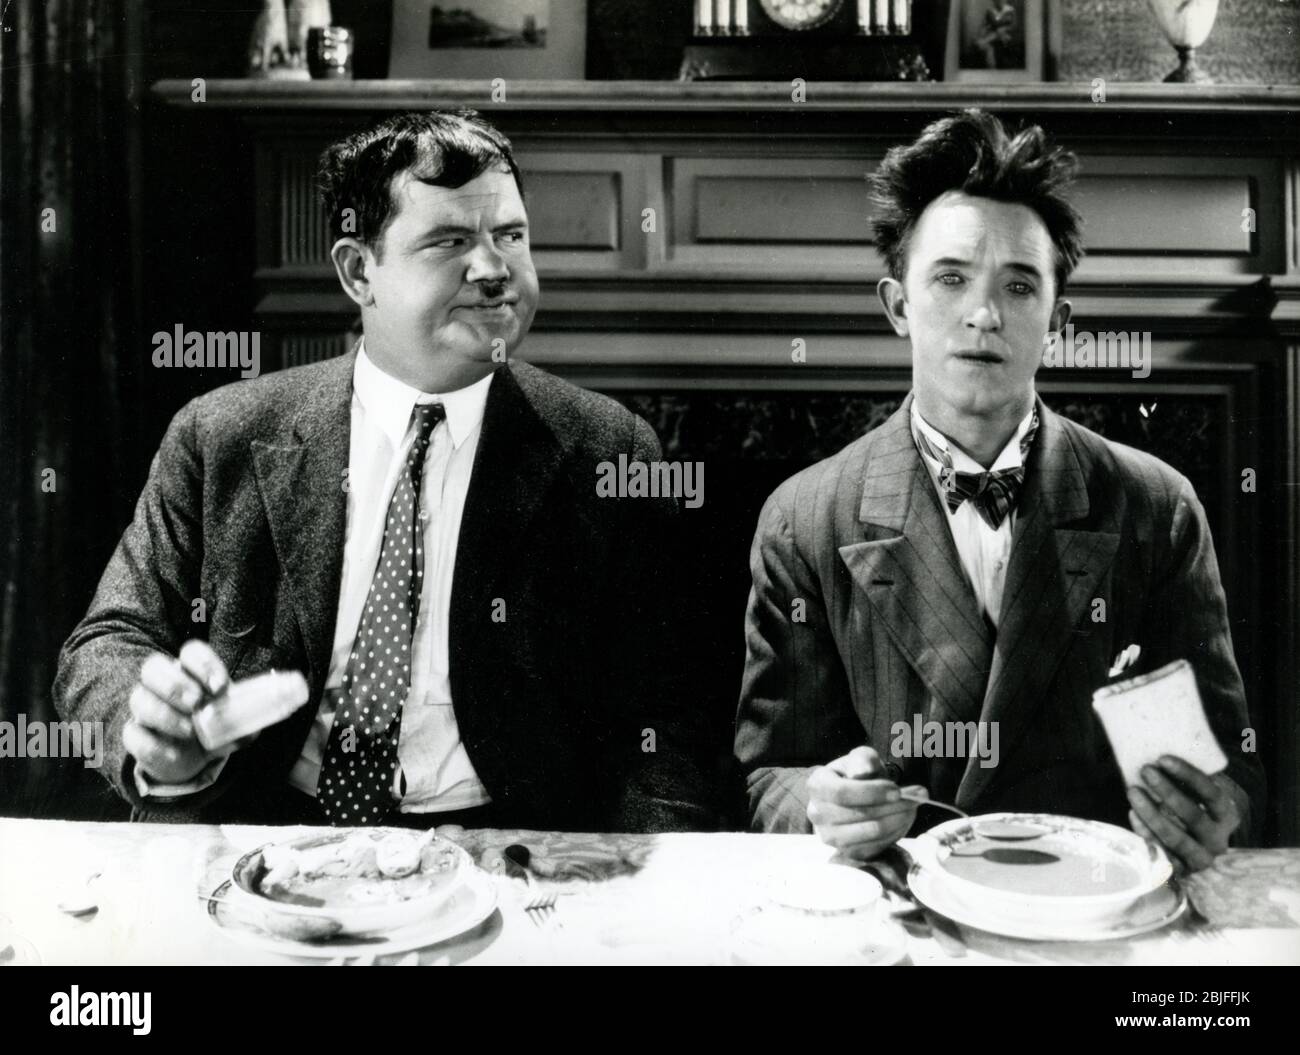 Laurel and Hardy at dinner table in a scene from "You're Darn Tootin",  a  silent short subject  classic MGM Hollywood comedy movie released in 1928. Stock Photo